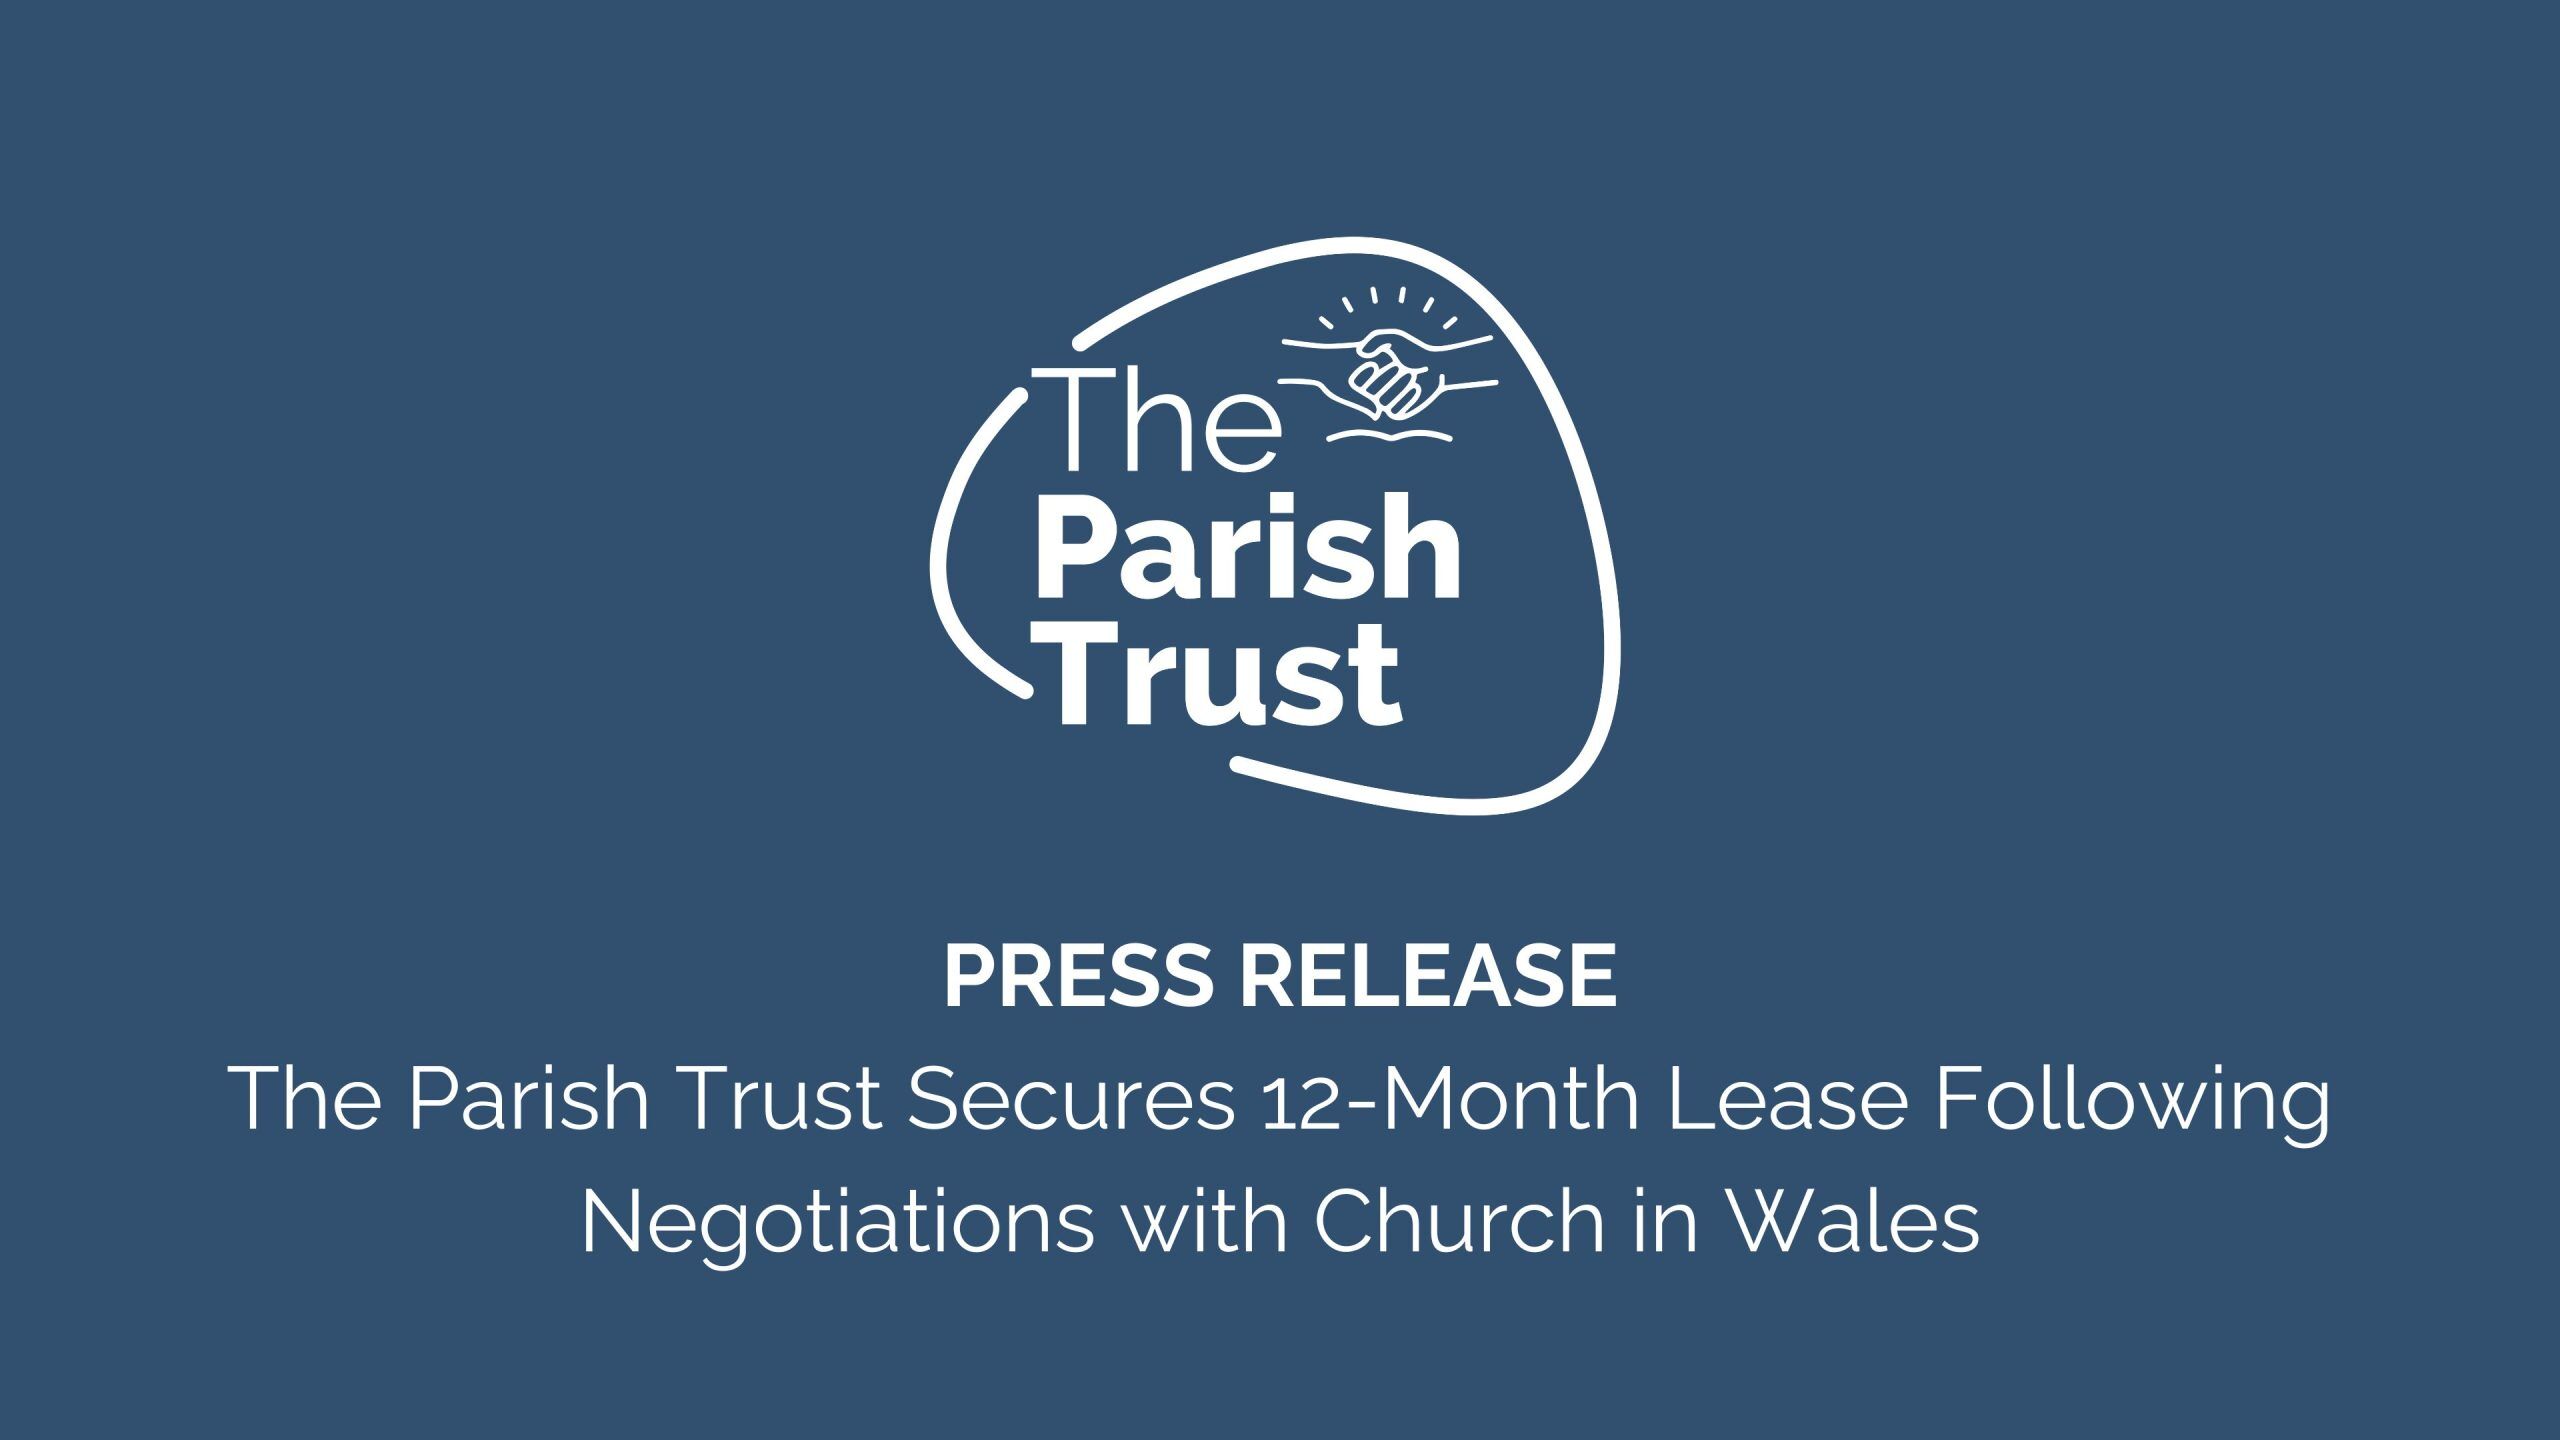 PRESS RELEASE: The Parish Trust Secures 12-Month Lease Following Negotiations with Church in Wales